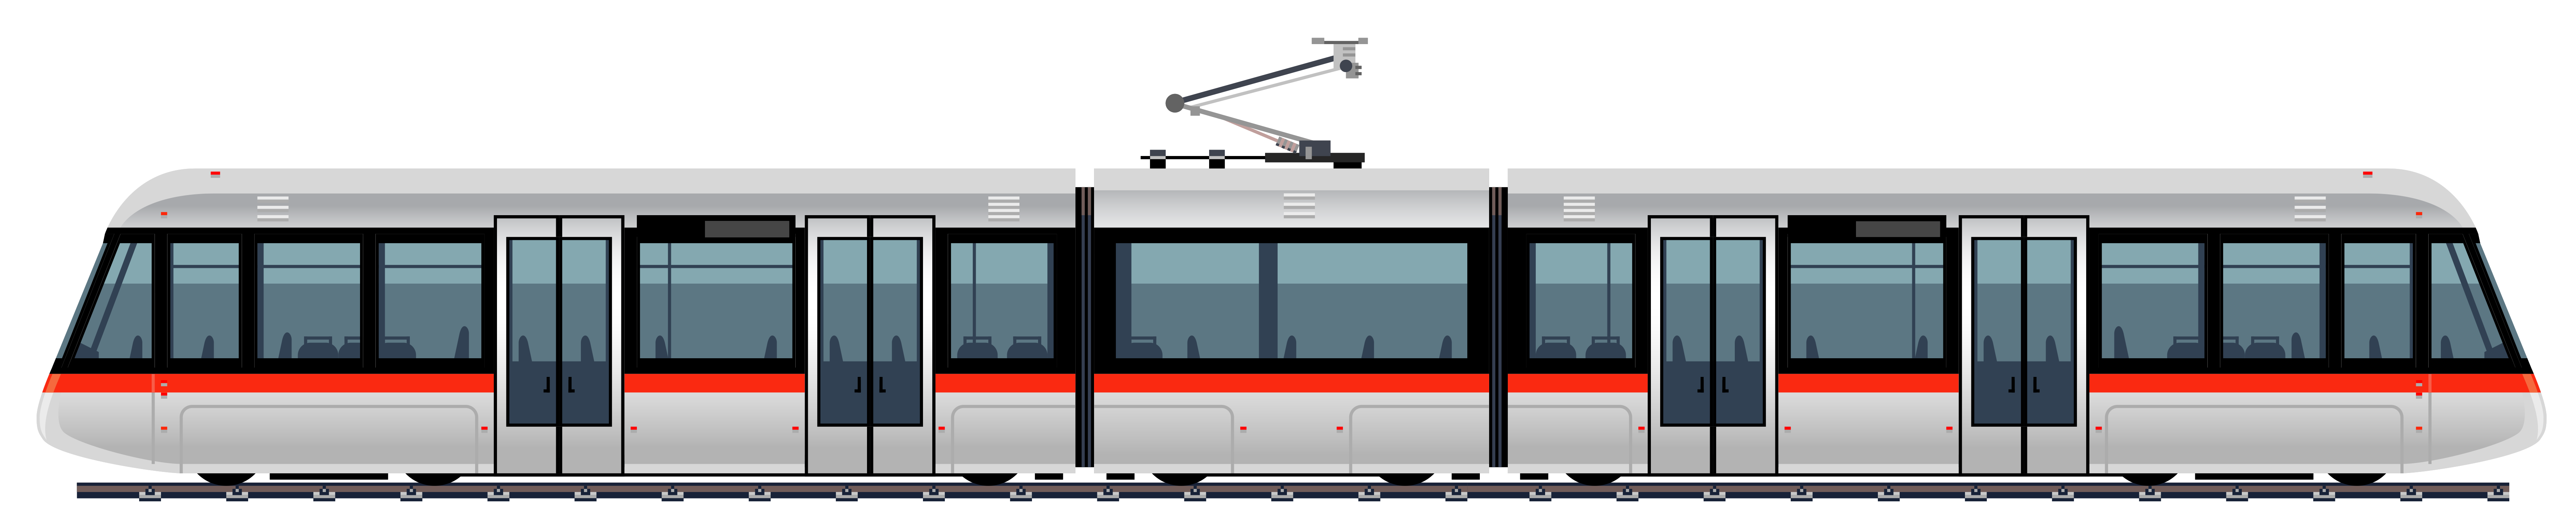 Tram PNG Isolated Transparent Image